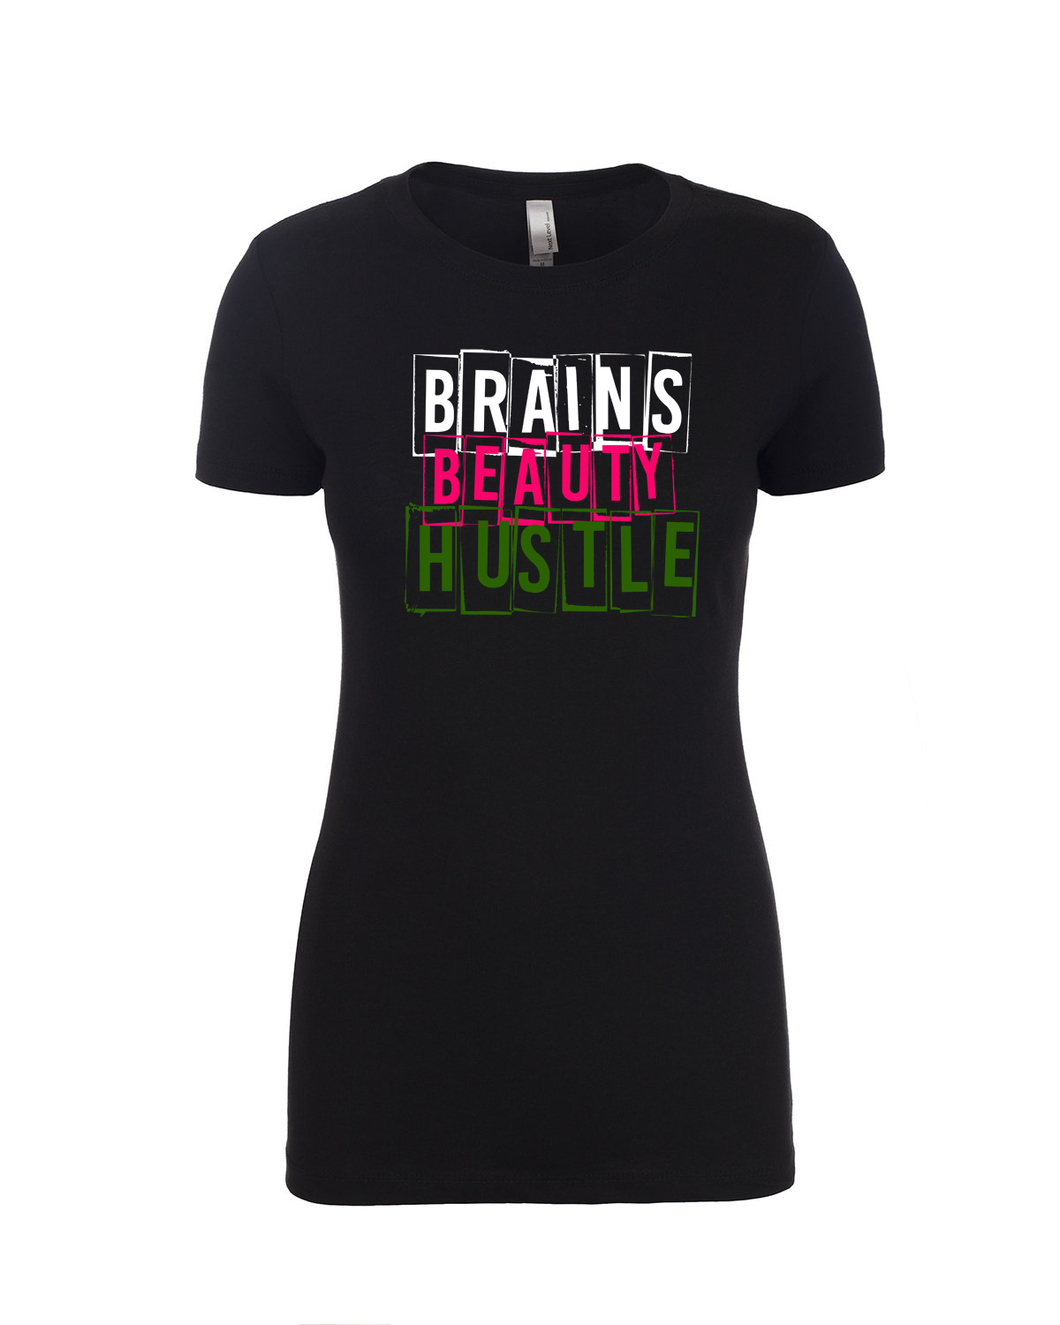 Brains, Beauty, Hustle Re-Loaded T-Shirt (Pink and Green)